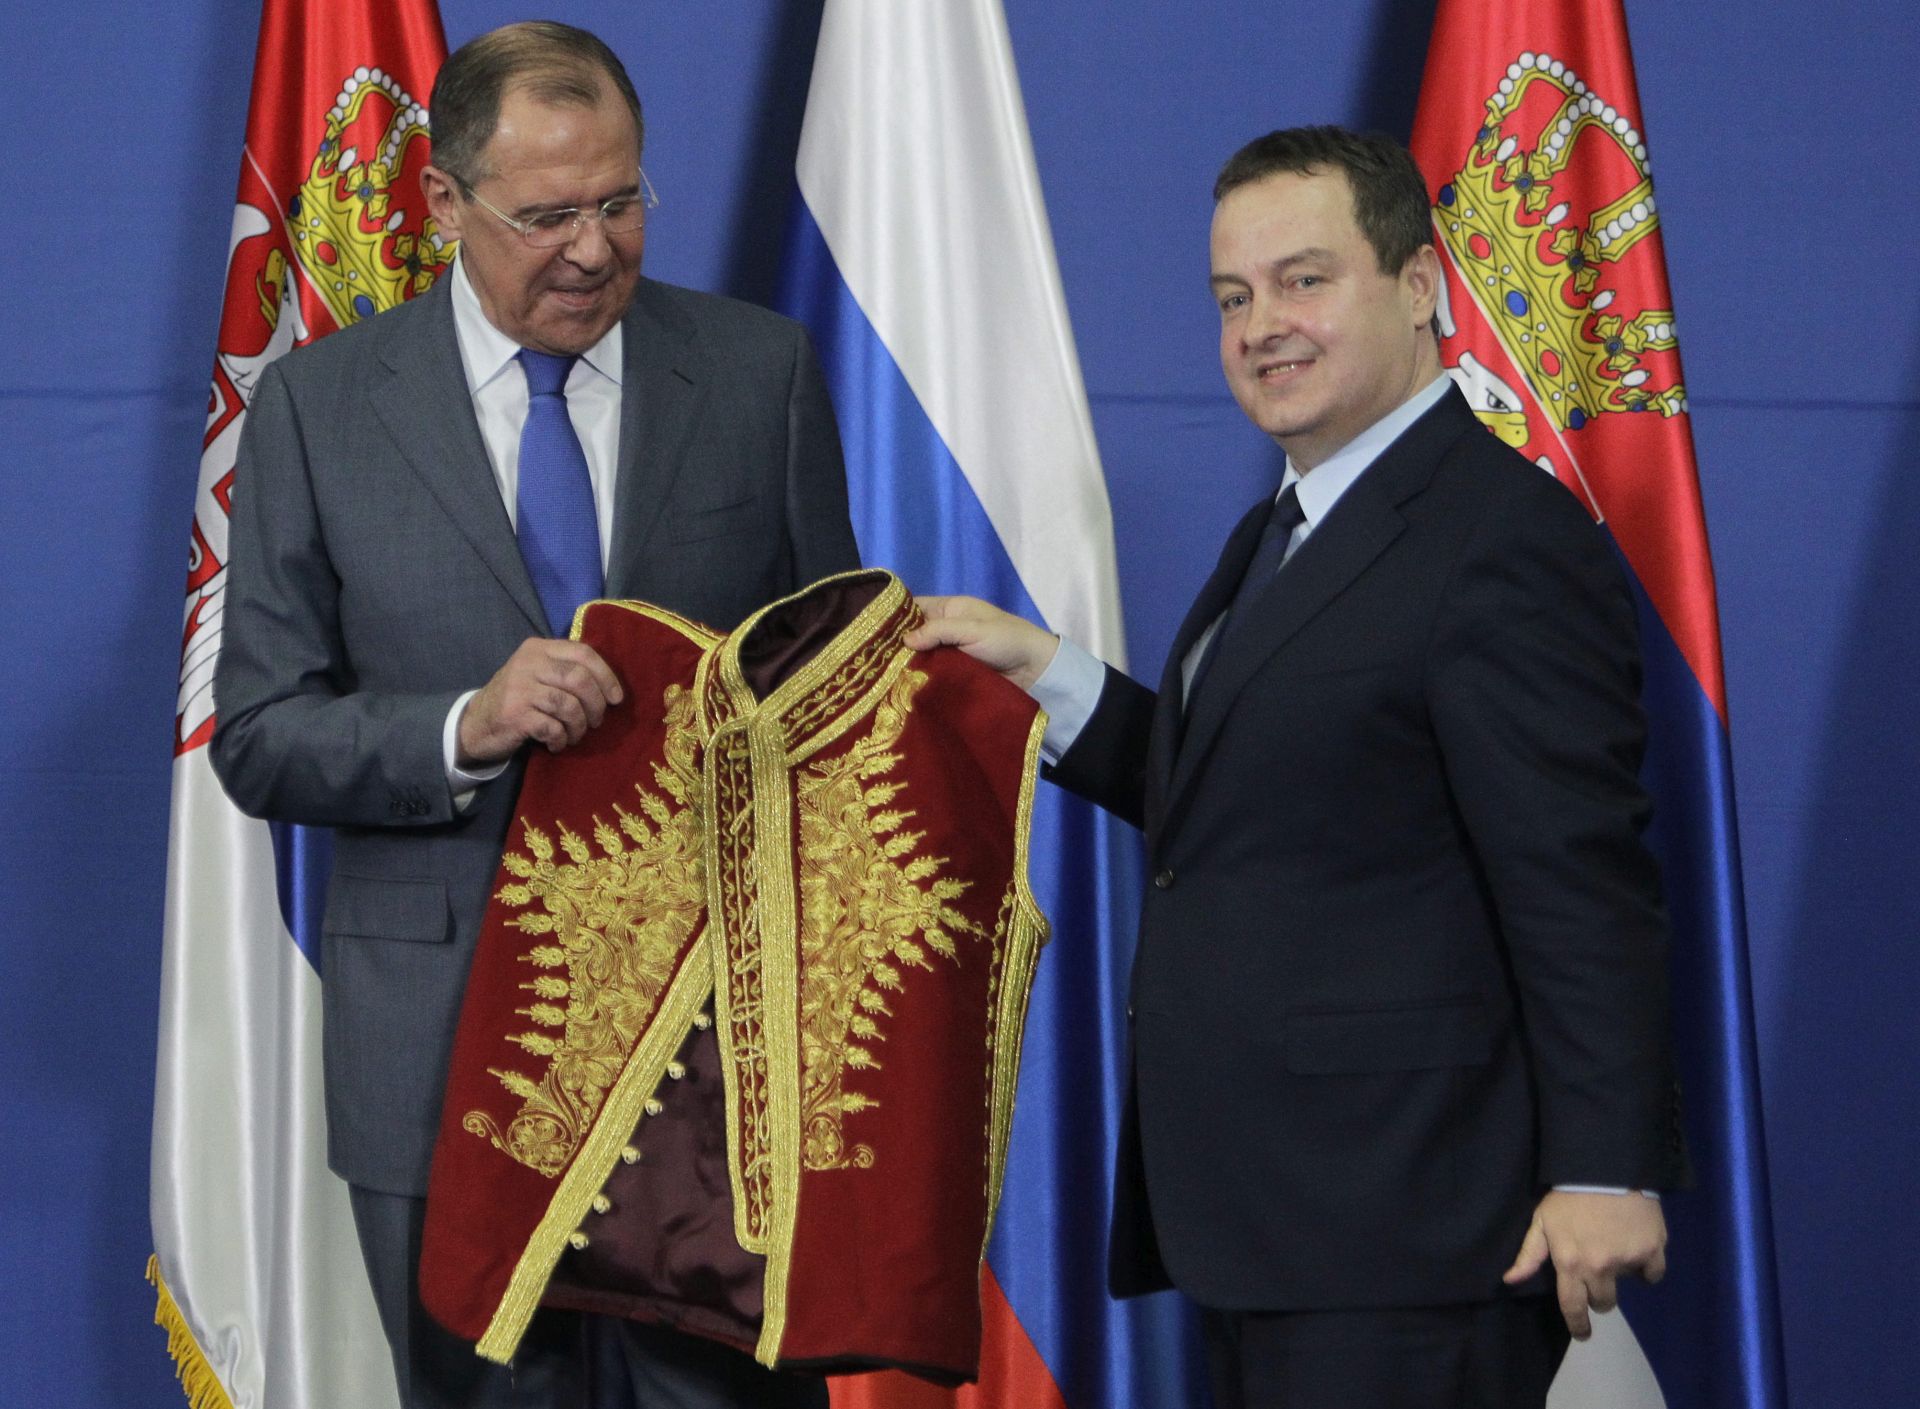 epa05672978 Russian Foreign Minister Sergey Lavrov (L) receives a traditional Serbian costume from Kosovo and Metohija region after the press conference with Serbian Foreign Minister Ivica Dacic (R) in Belgrade, Serbia, 12 December 2016. Russian Foreign Minister Lavrov is on a two day official visit to Serbia, where he will meet with Serbian top officials and will participate in the Black Sea Economic meeting (BSCEC) on 13 December 2016.  EPA/ANDREJ CUKIC